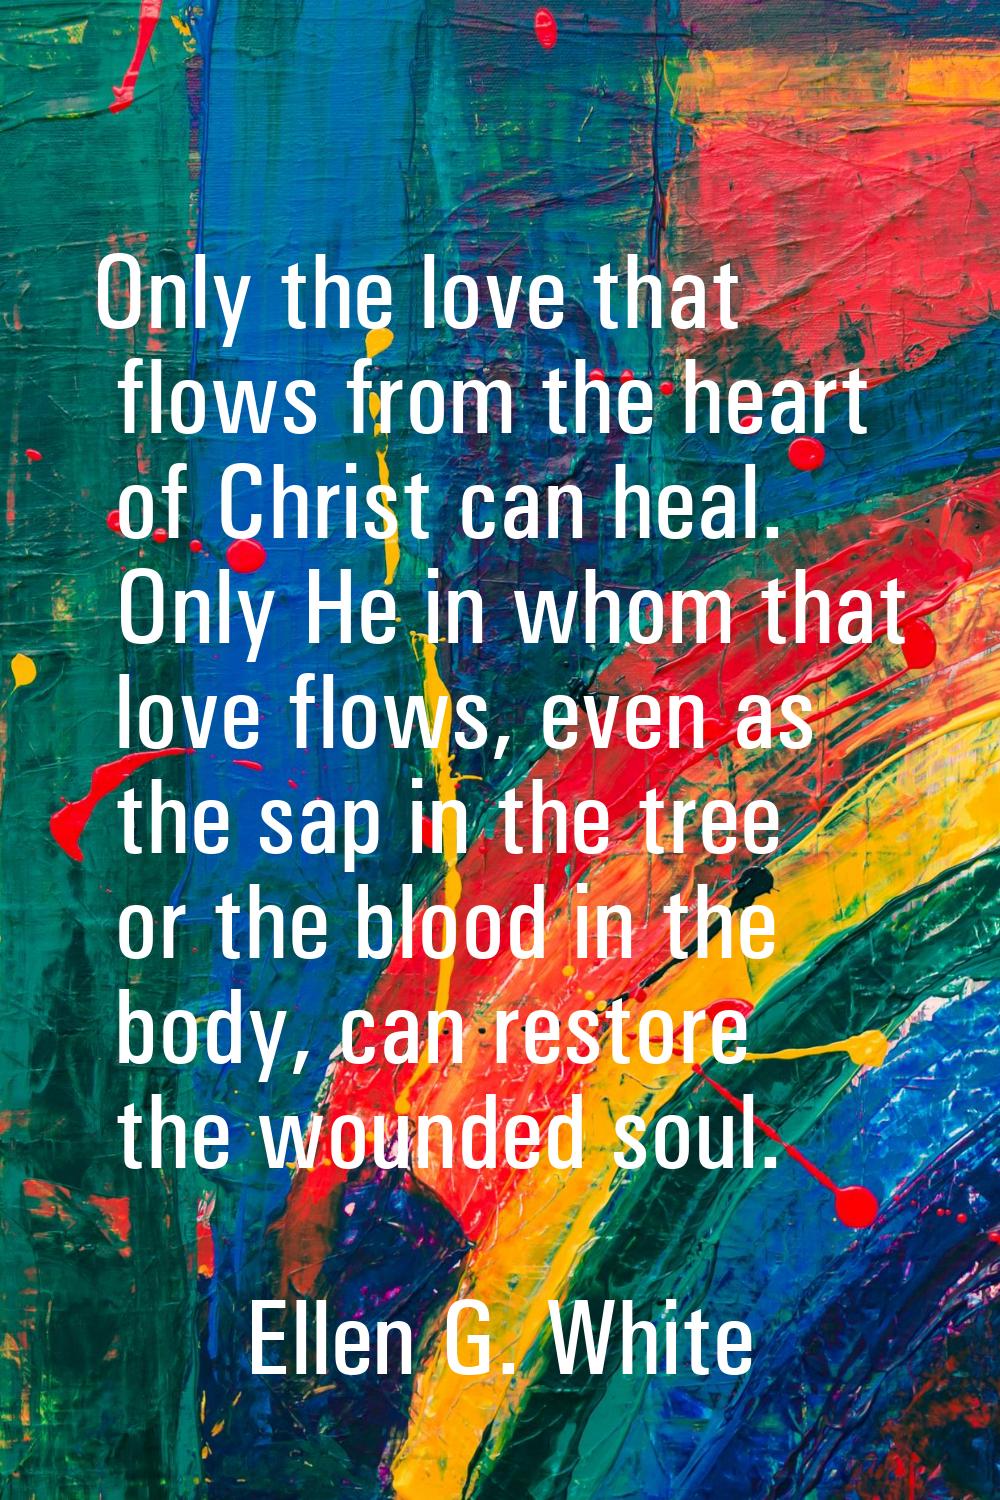 Only the love that flows from the heart of Christ can heal. Only He in whom that love flows, even a